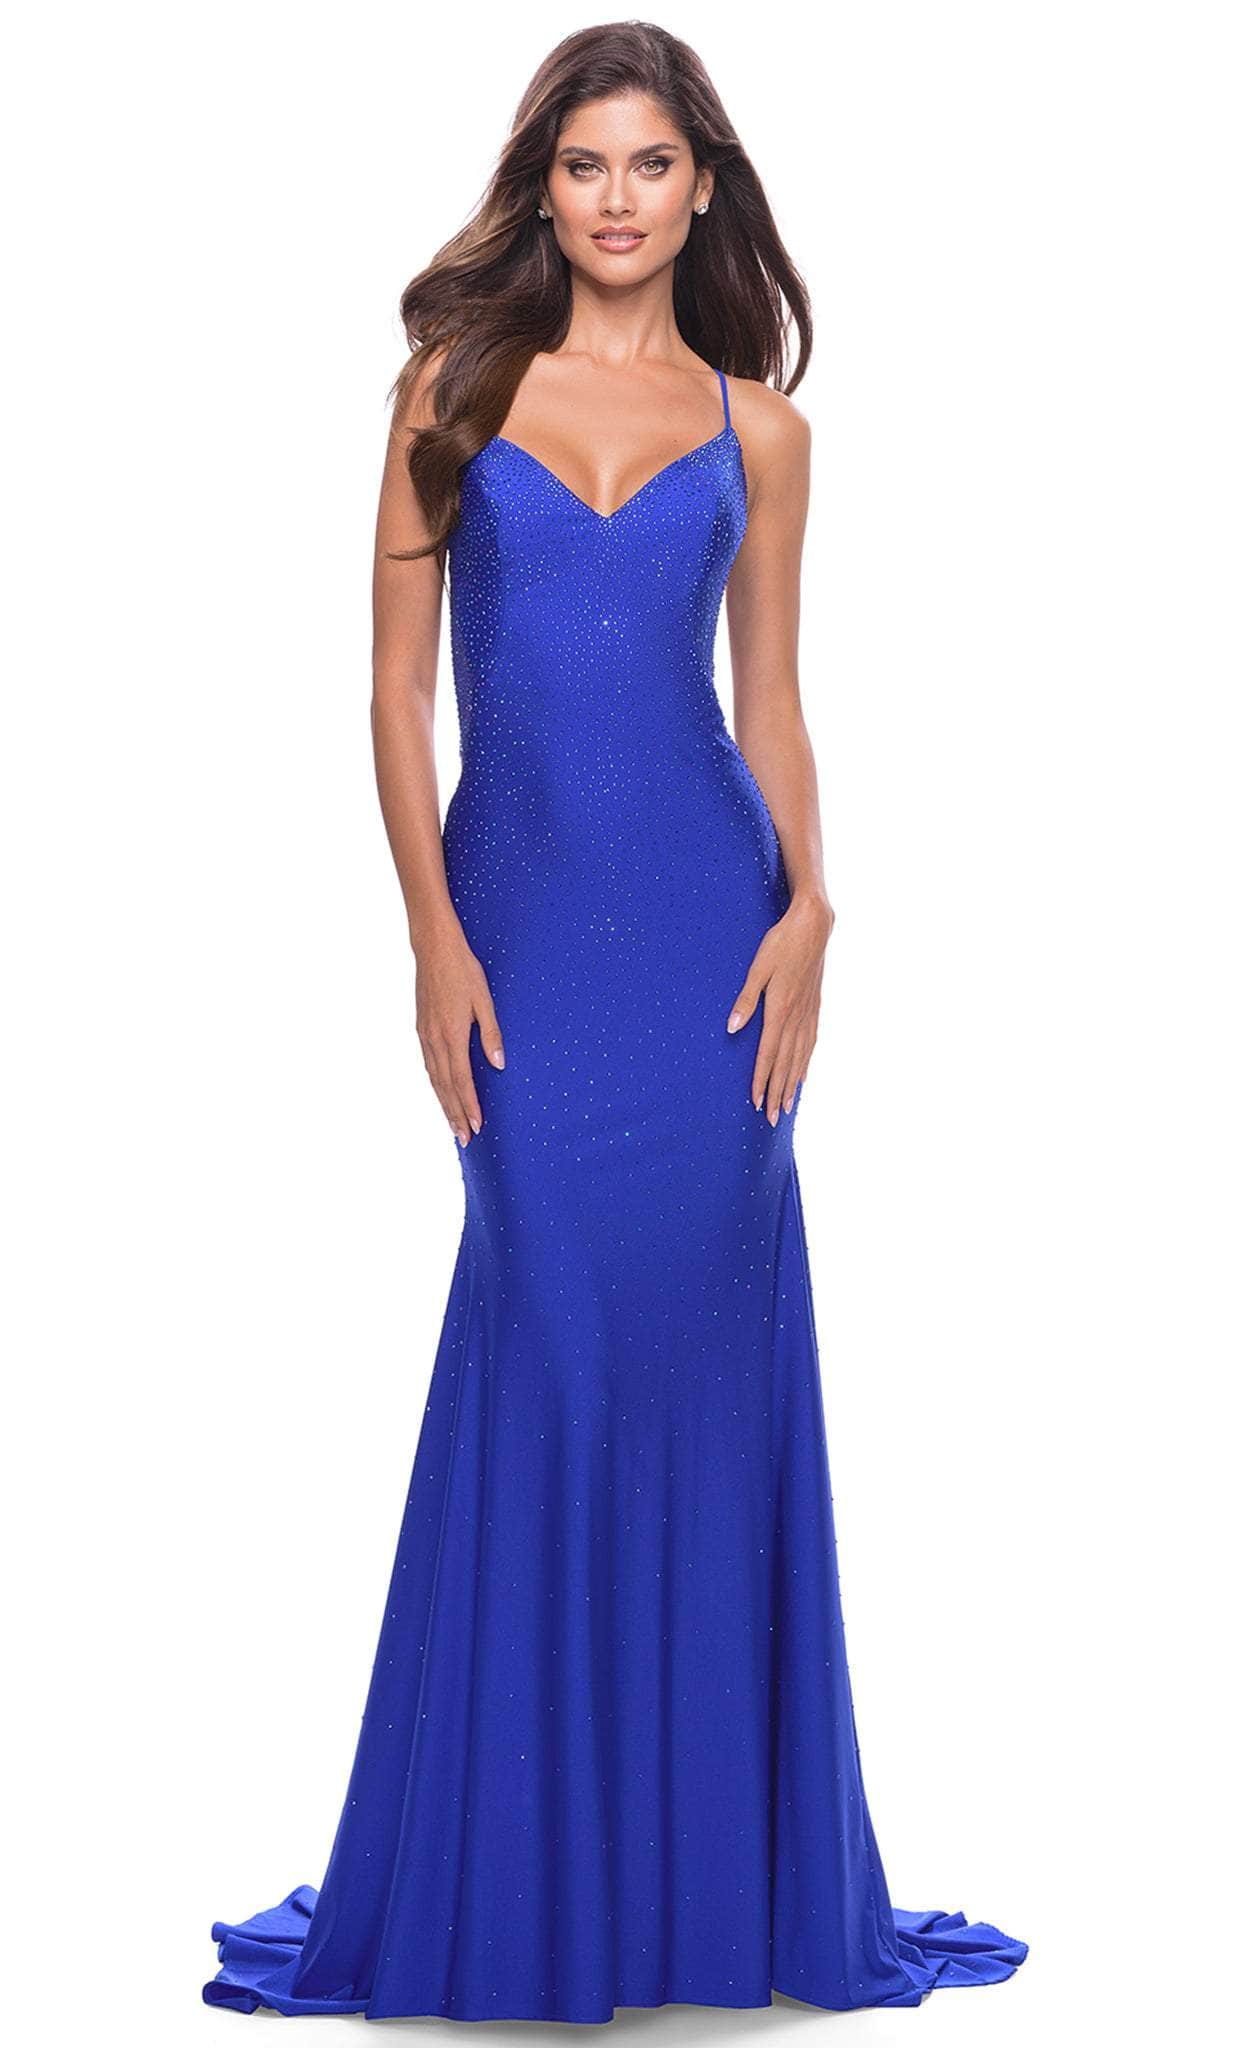 Image of La Femme 31279 - Sleeveless Jersey Prom Gown